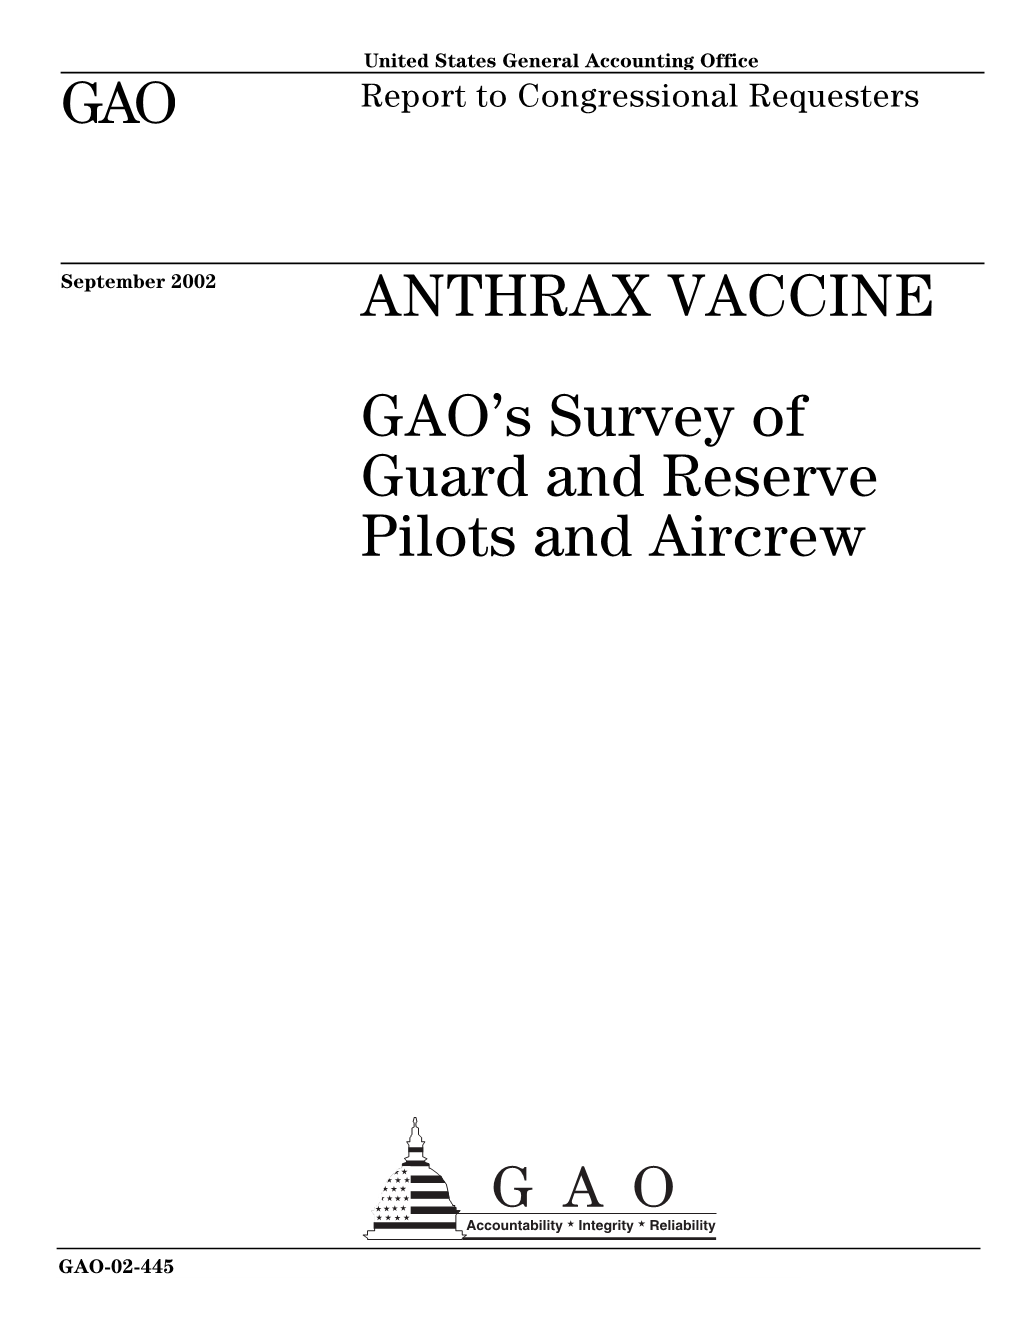 GAO-02-445 Anthrax Vaccine Adverse Reactions 41 Dosage and Administration 44 How Supplied/Storage 45 Nonclinical Toxicology 45 References 46